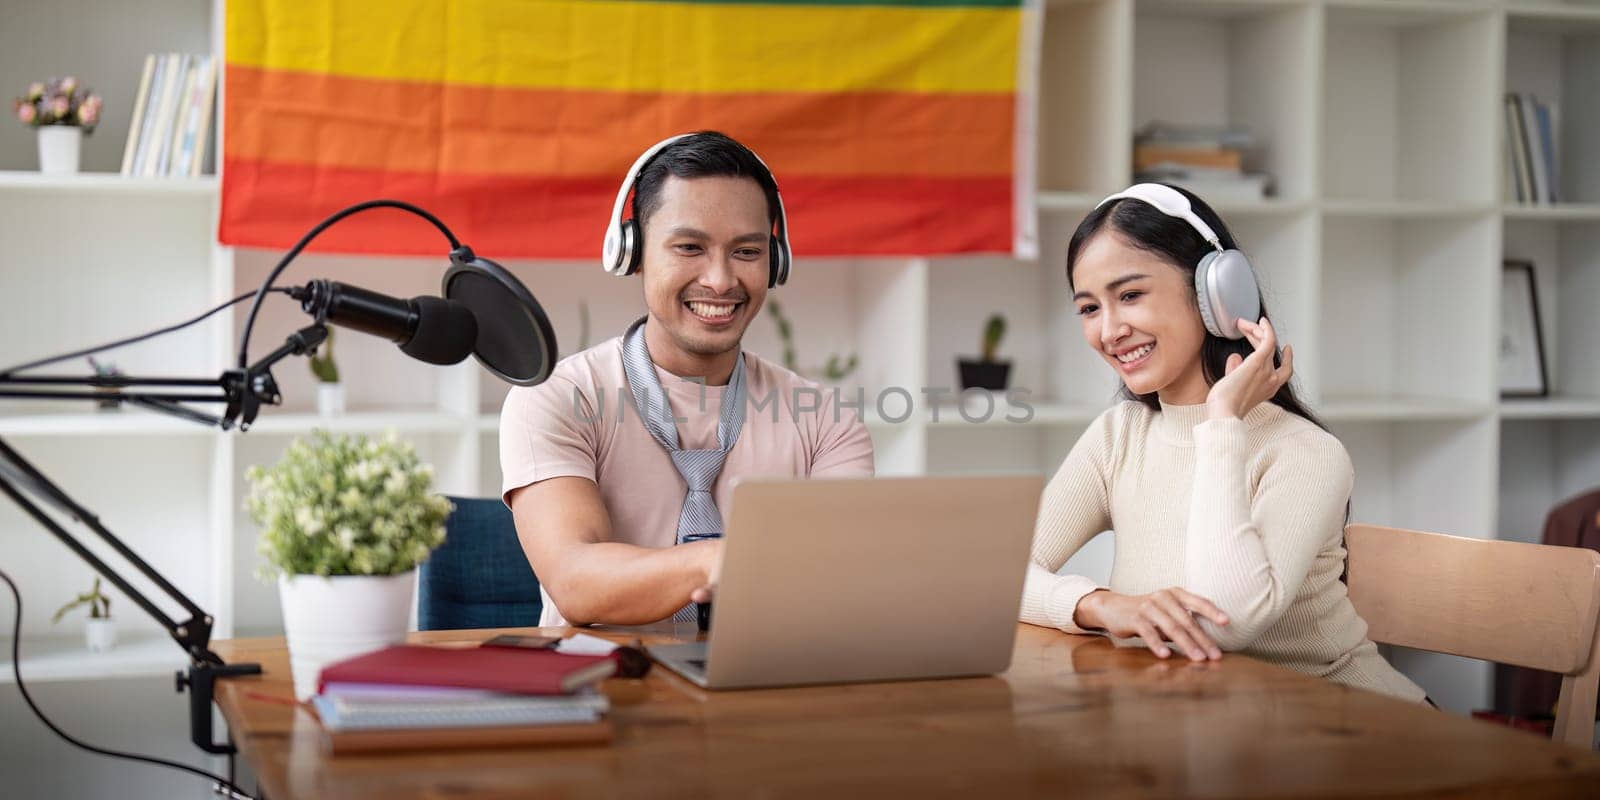 Asian gay radio host enjoy chatting while record an audio podcast with female friend by nateemee